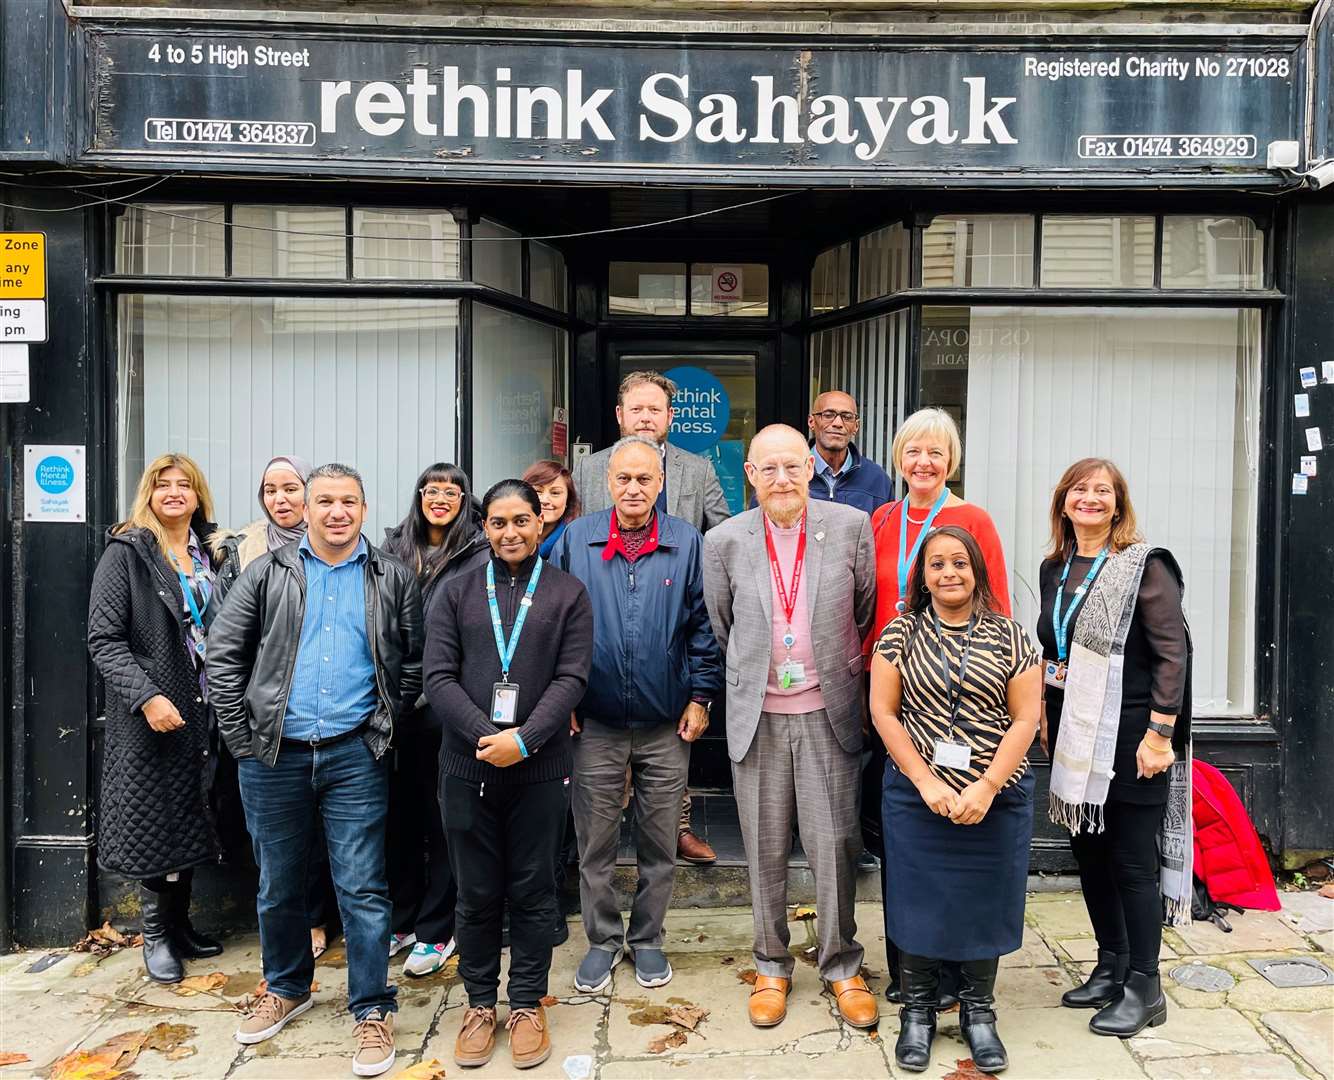 The community and Rethink Sahayak staff with Rethink Mental Illness Chief Executive, Mark Winstanley and Board of Trustee Chair, Kathryn Tyson